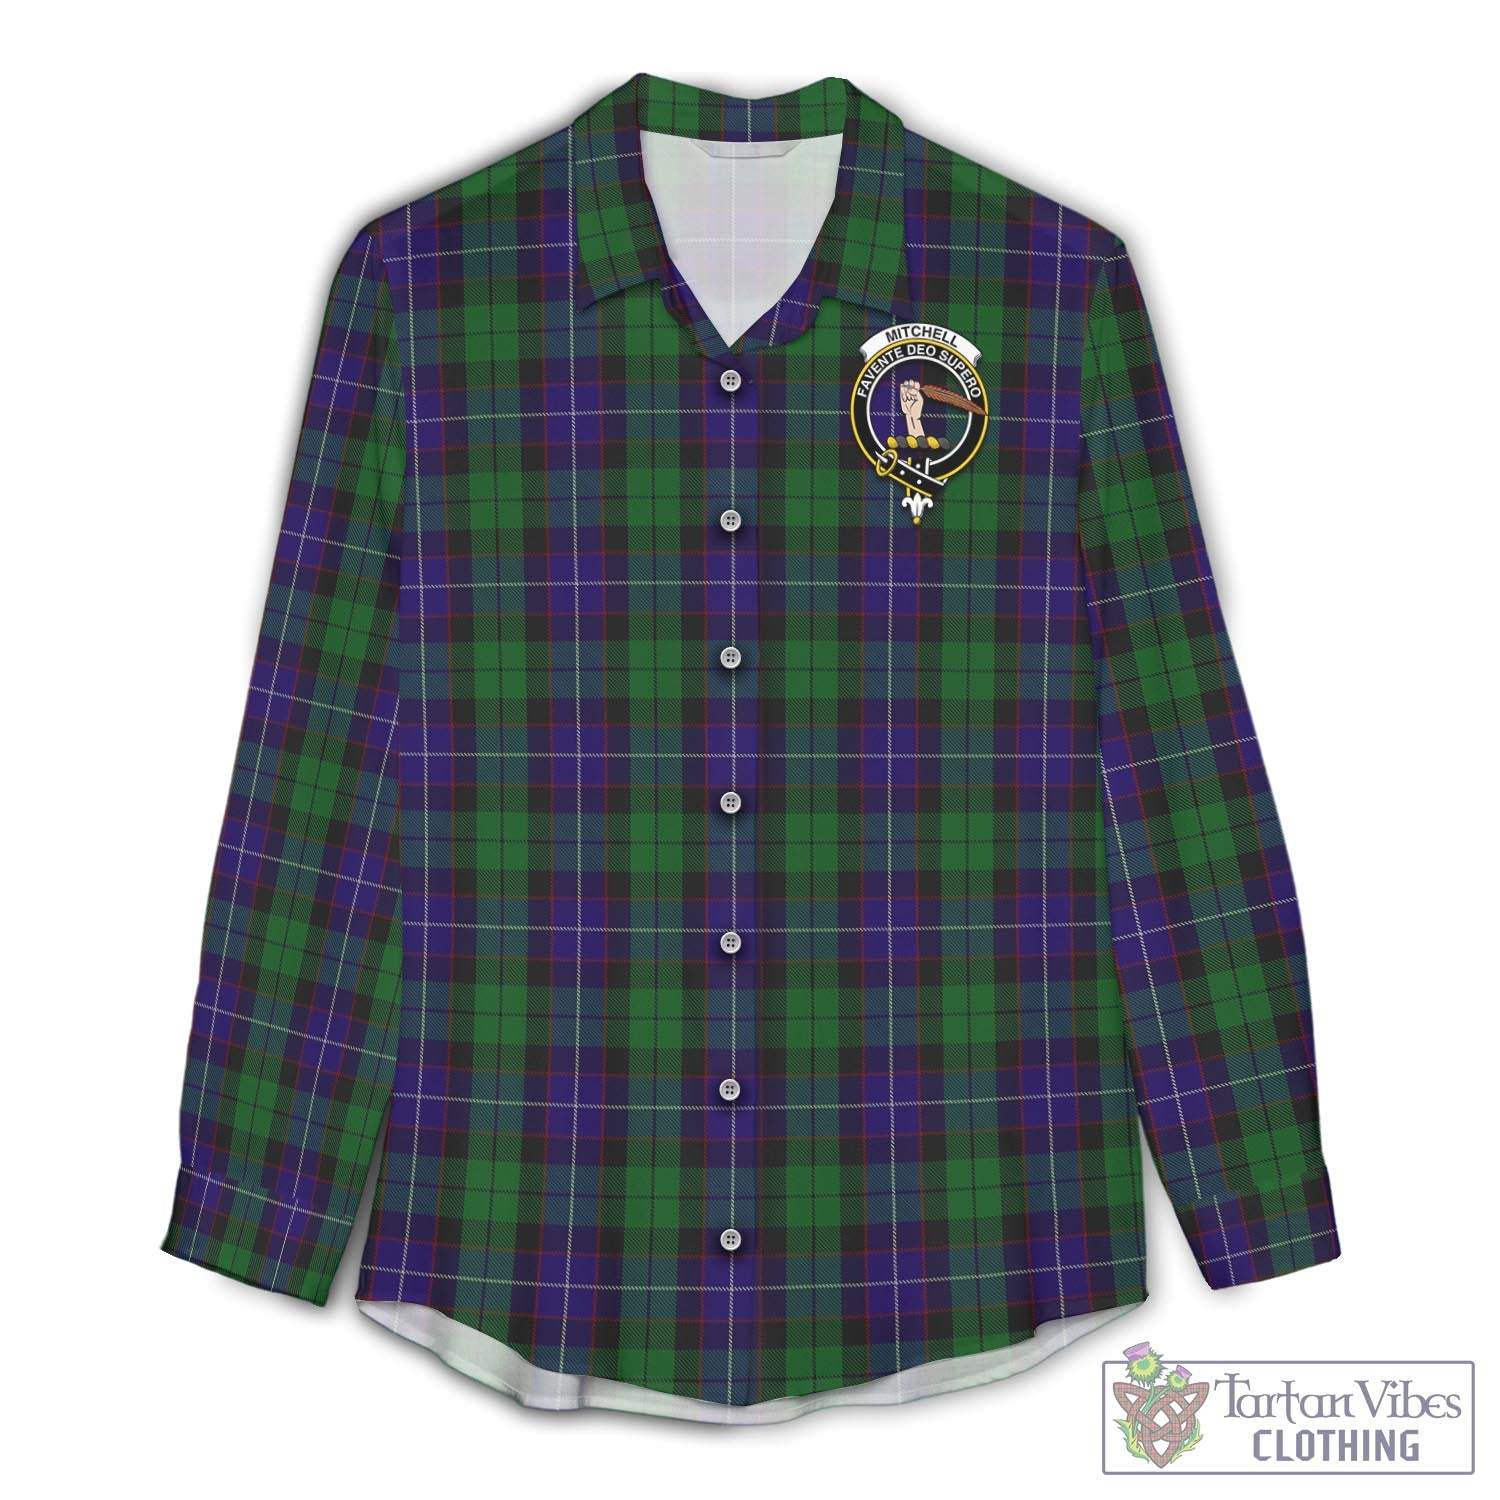 Tartan Vibes Clothing Mitchell Tartan Womens Casual Shirt with Family Crest